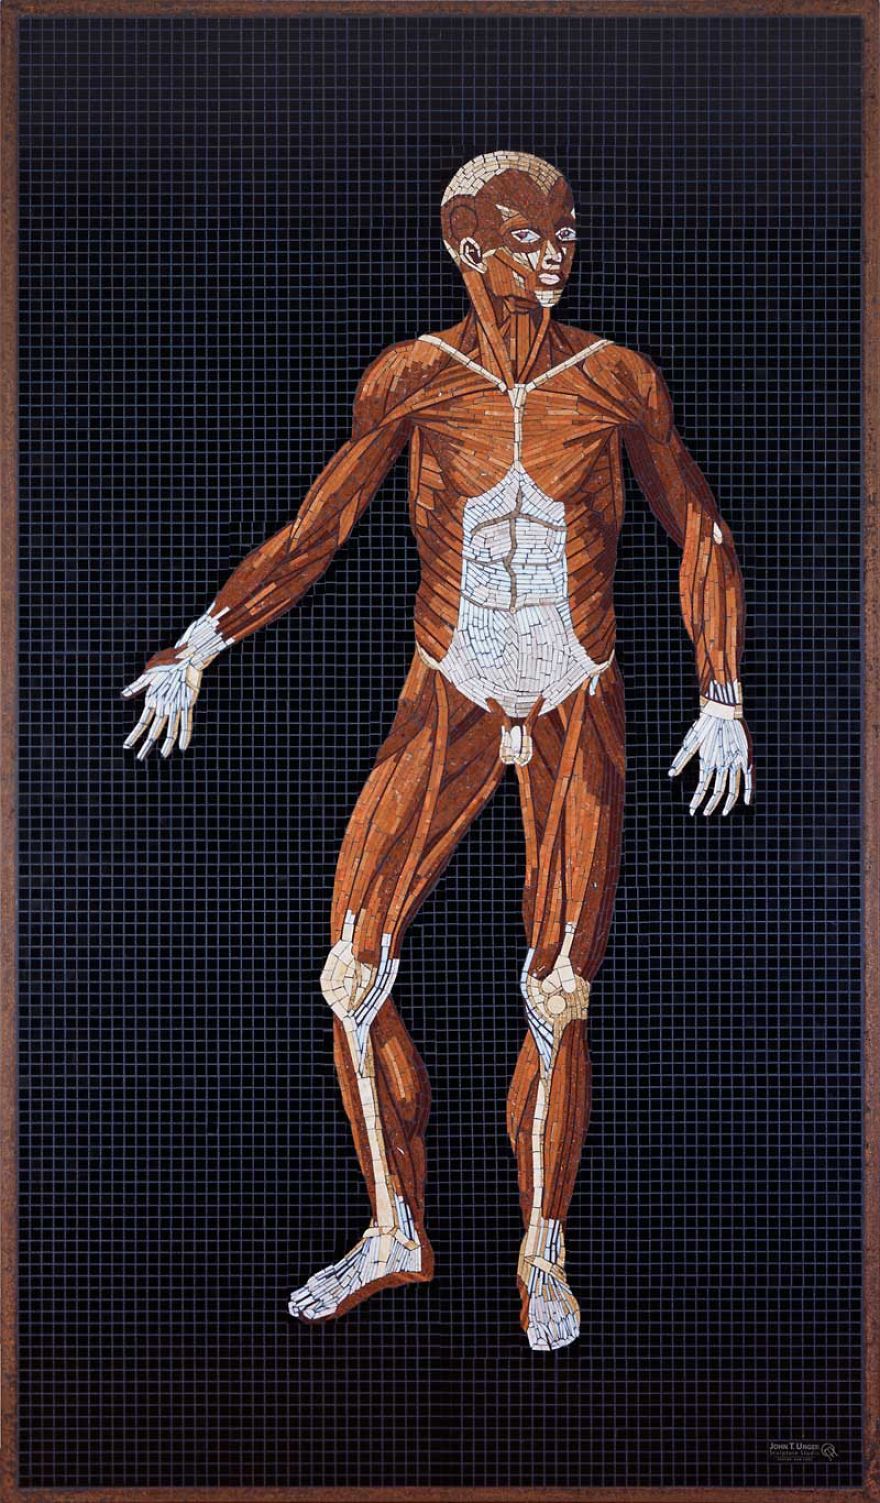 I Used Marble, Stone And Precious Gems To Create Realistic Mosaics Of 16th Century Anatomical Drawings